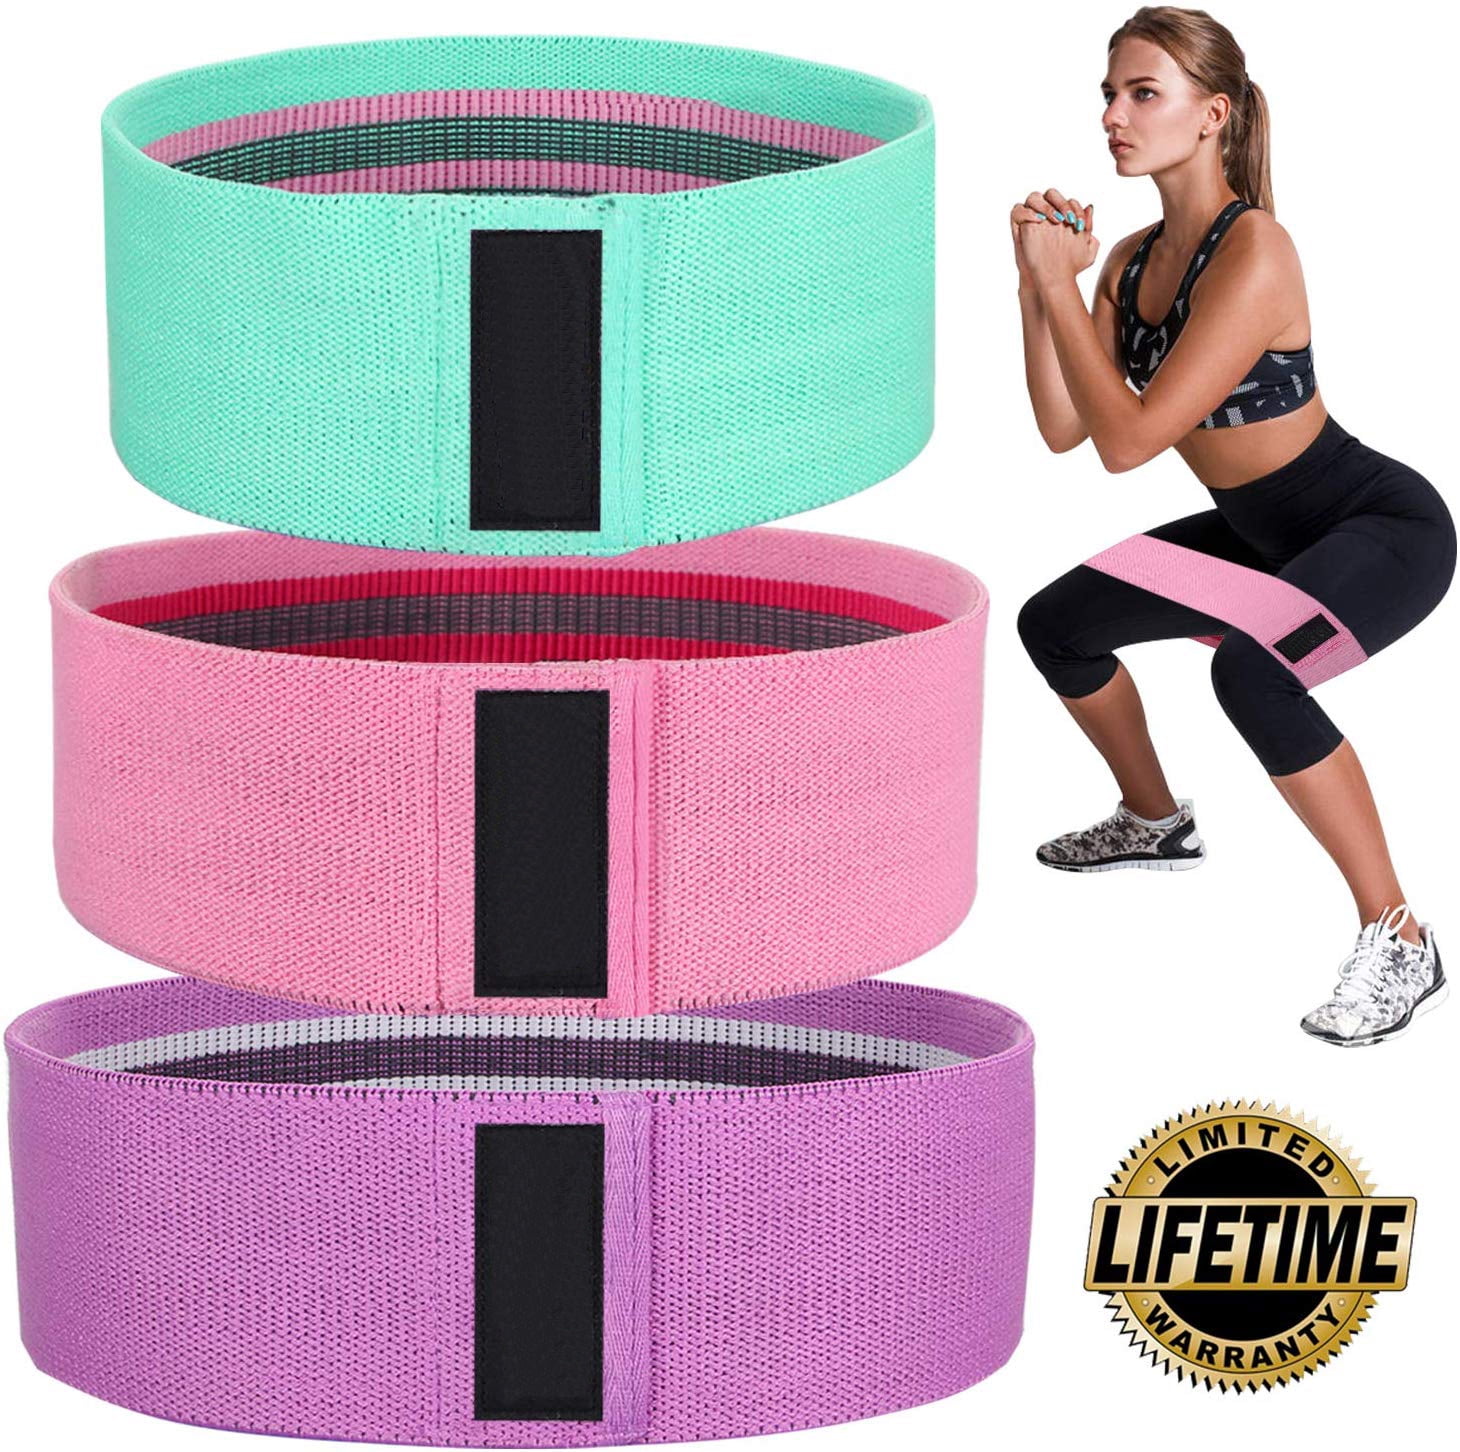 Fabric Resistance Bands Hip Circle Glute Booty Butt Exercise Loop Non Slip Set^ 